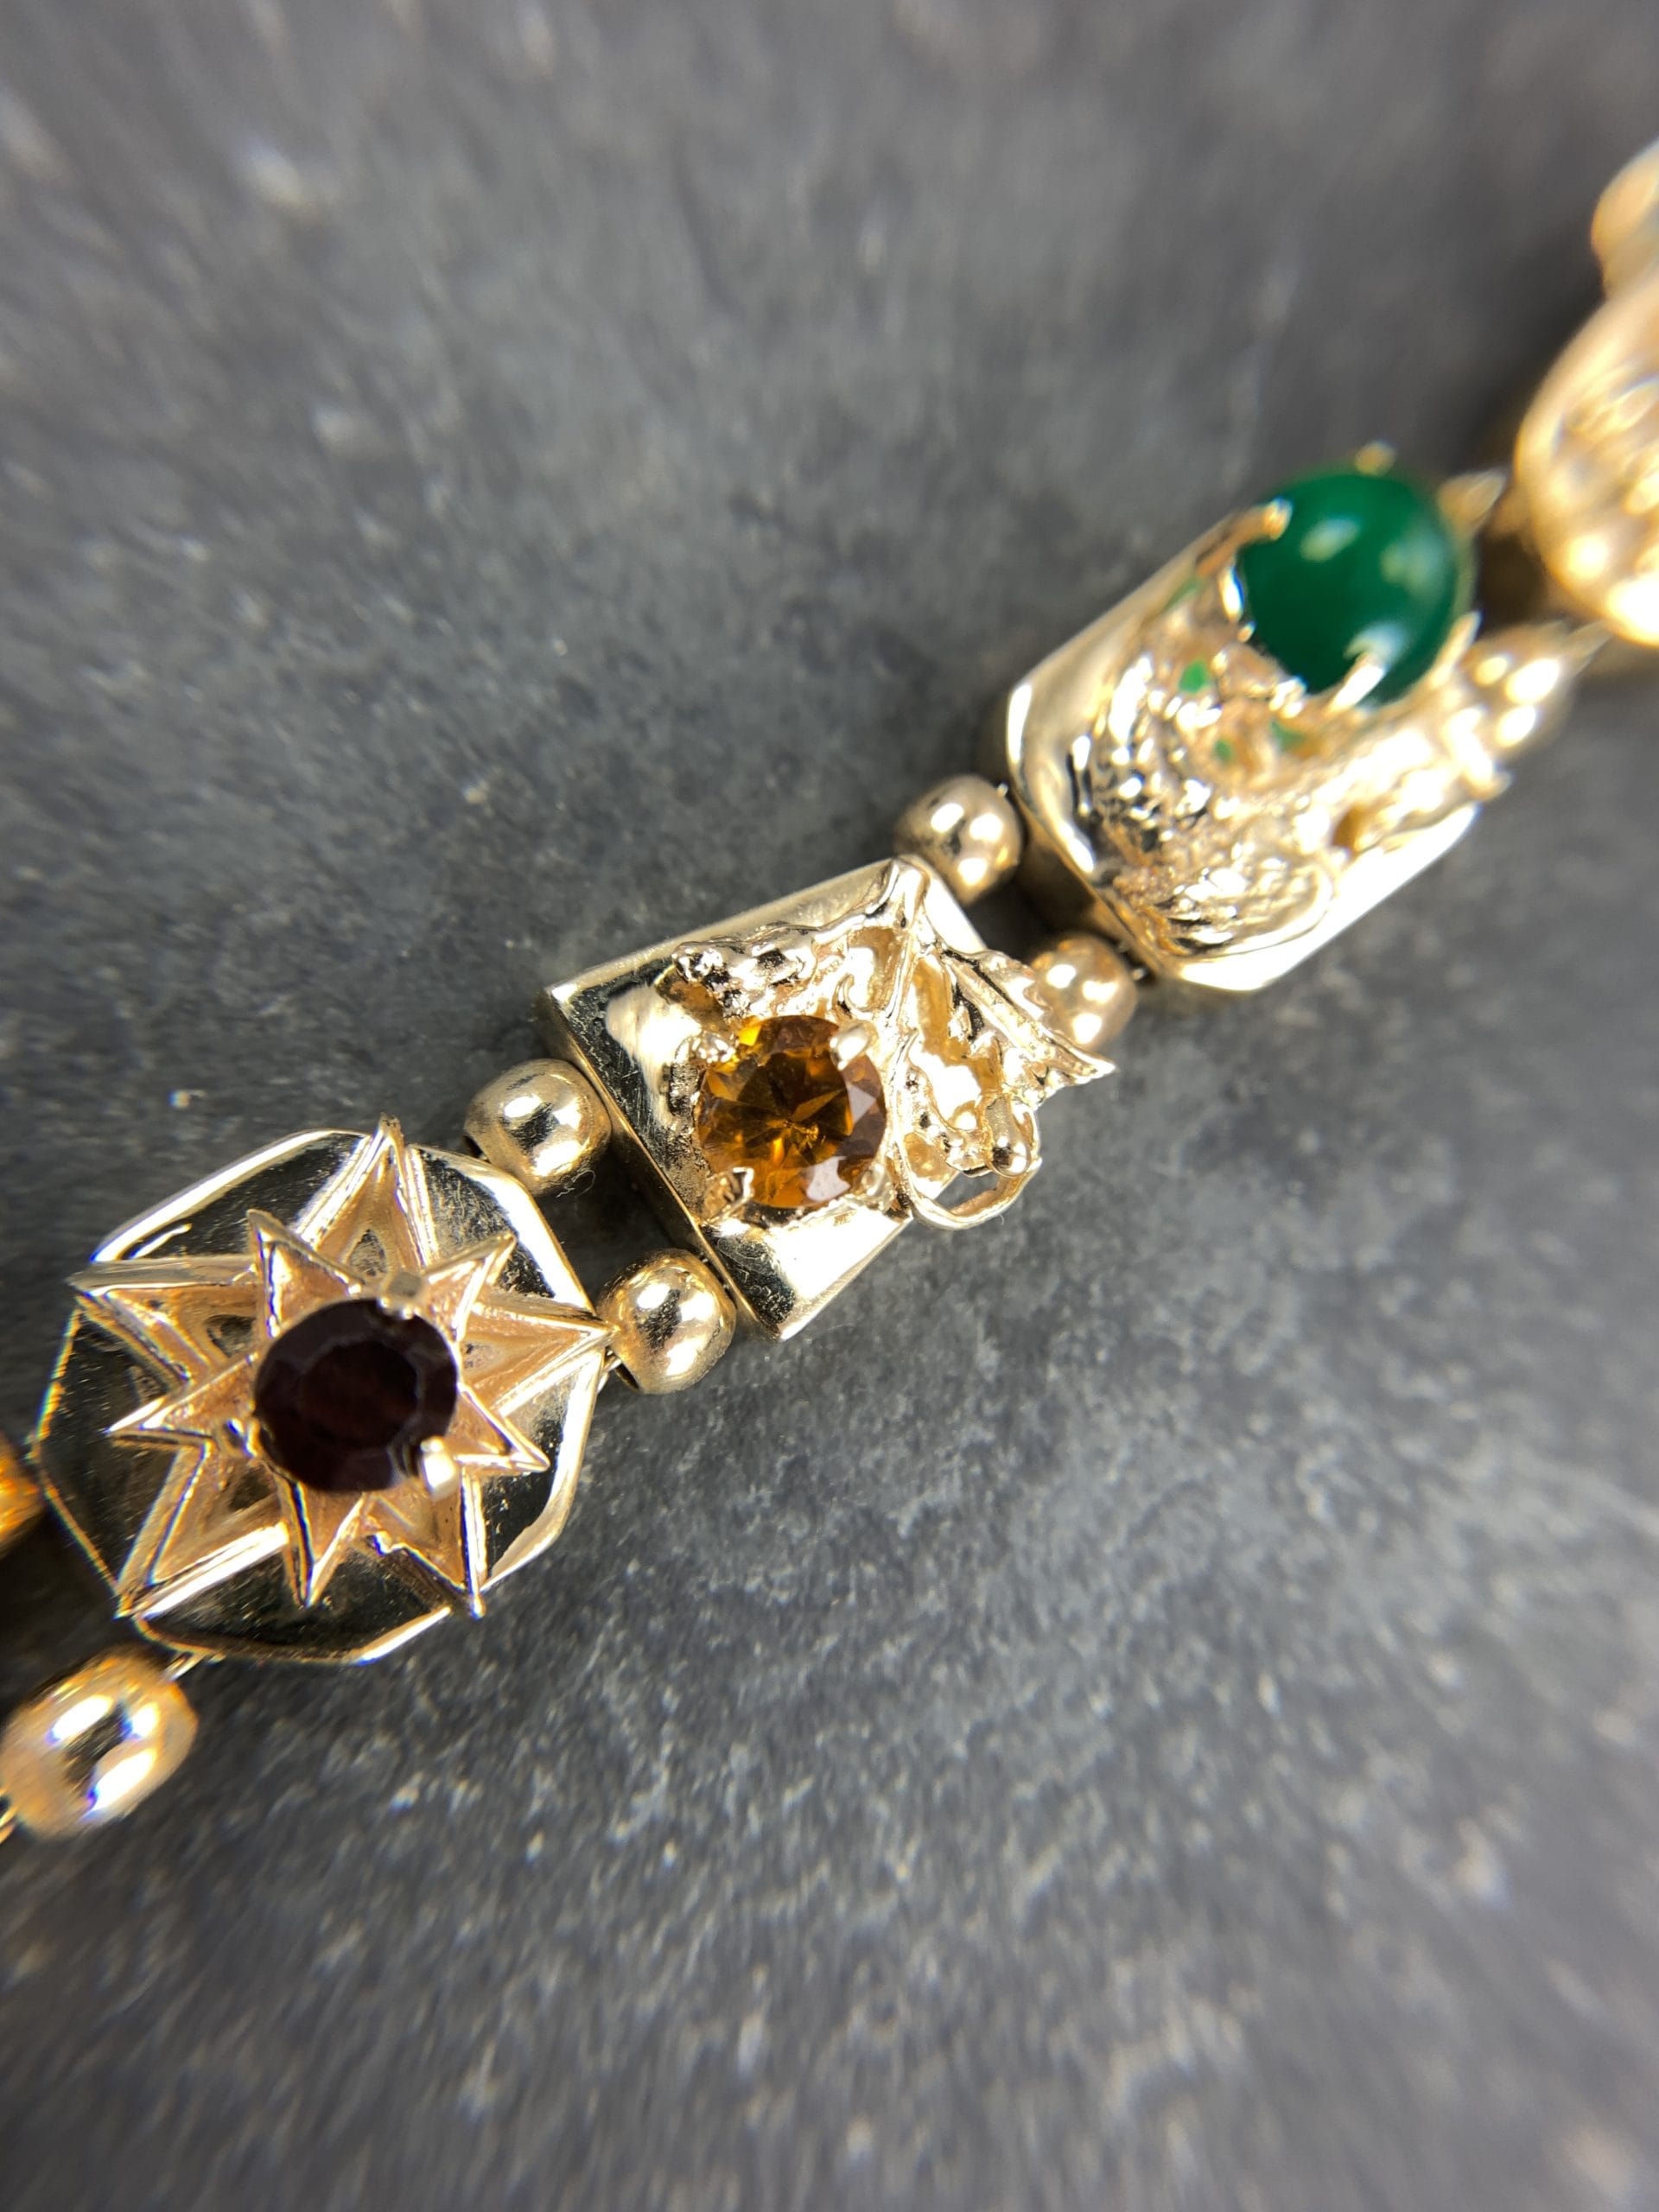 Vintage Artistic Multi Stone Bracelet with Gems and Enamel in 14k Yellow  Gold (A2486) - Summit Jewelers | 7821 Big Bend Blvd. | Webster Groves, MO |  63119